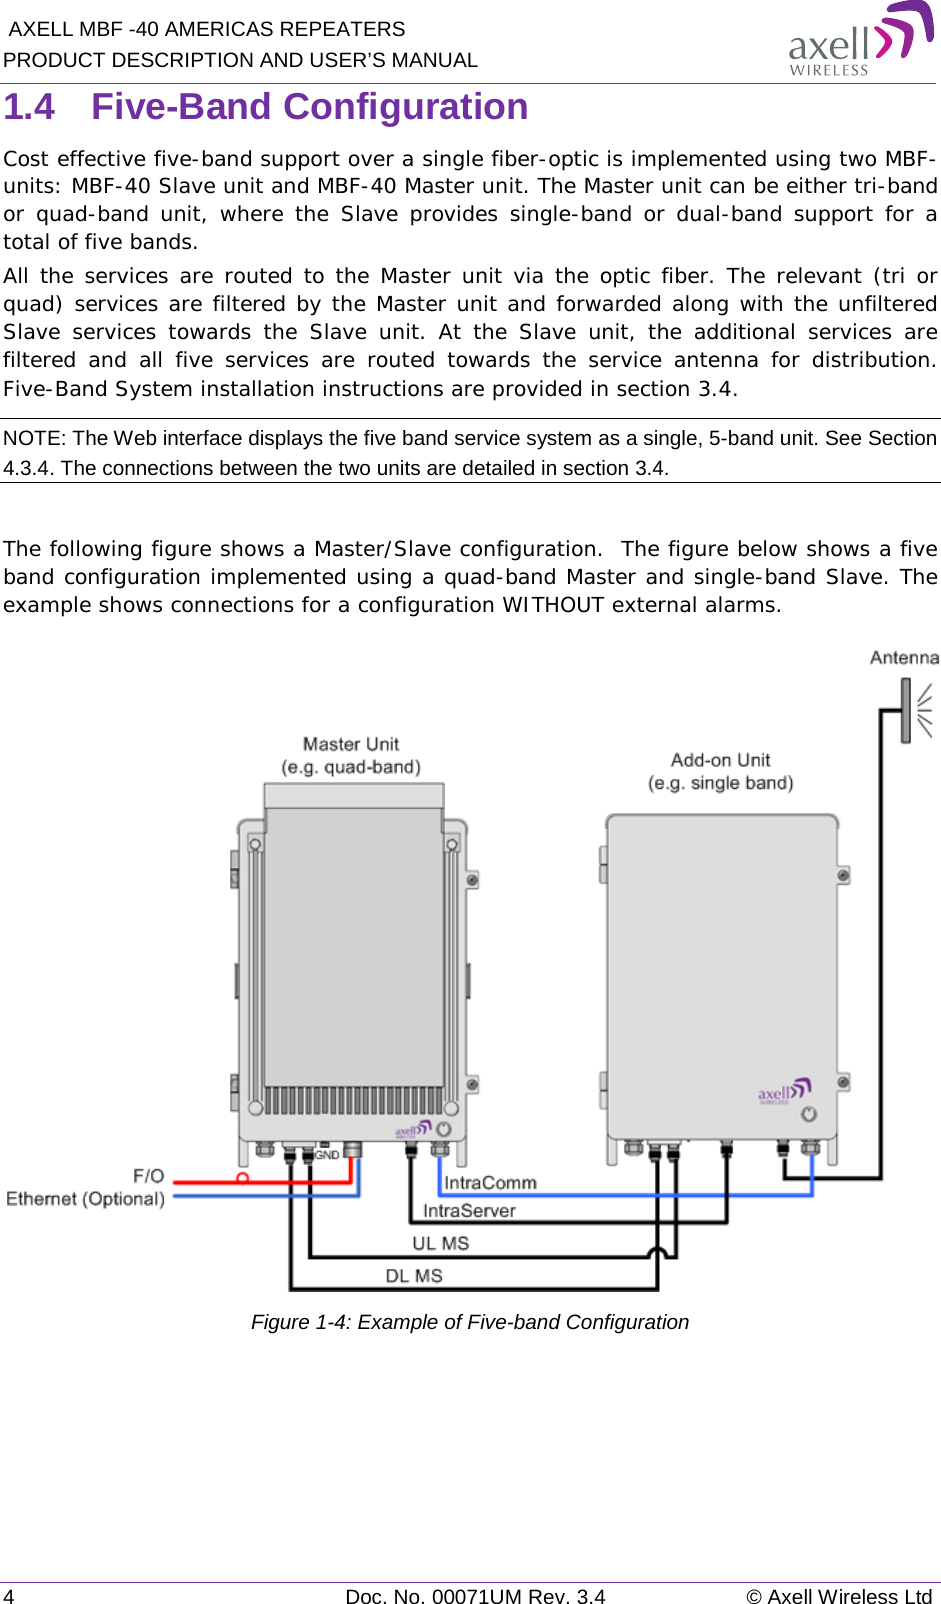  AXELL MBF -40 AMERICAS REPEATERS PRODUCT DESCRIPTION AND USER’S MANUAL 4  Doc. No. 00071UM Rev. 3.4 © Axell Wireless Ltd 1.4  Five-Band Configuration Cost effective five-band support over a single fiber-optic is implemented using two MBF-units: MBF-40 Slave unit and MBF-40 Master unit. The Master unit can be either tri-band or quad-band unit, where the Slave provides single-band or dual-band support for a total of five bands. All the services are routed to the Master unit via the optic fiber. The relevant (tri or quad) services are filtered by the Master unit and forwarded along with the unfiltered Slave services towards the Slave unit. At the Slave unit, the additional services are filtered and all five services are routed towards the service antenna for distribution. Five-Band System installation instructions are provided in section  3.4. NOTE: The Web interface displays the five band service system as a single, 5-band unit. See Section  4.3.4. The connections between the two units are detailed in section  3.4.  The following figure shows a Master/Slave configuration.  The figure below shows a five band configuration implemented using a quad-band Master and single-band Slave. The example shows connections for a configuration WITHOUT external alarms.  Figure  1-4: Example of Five-band Configuration   